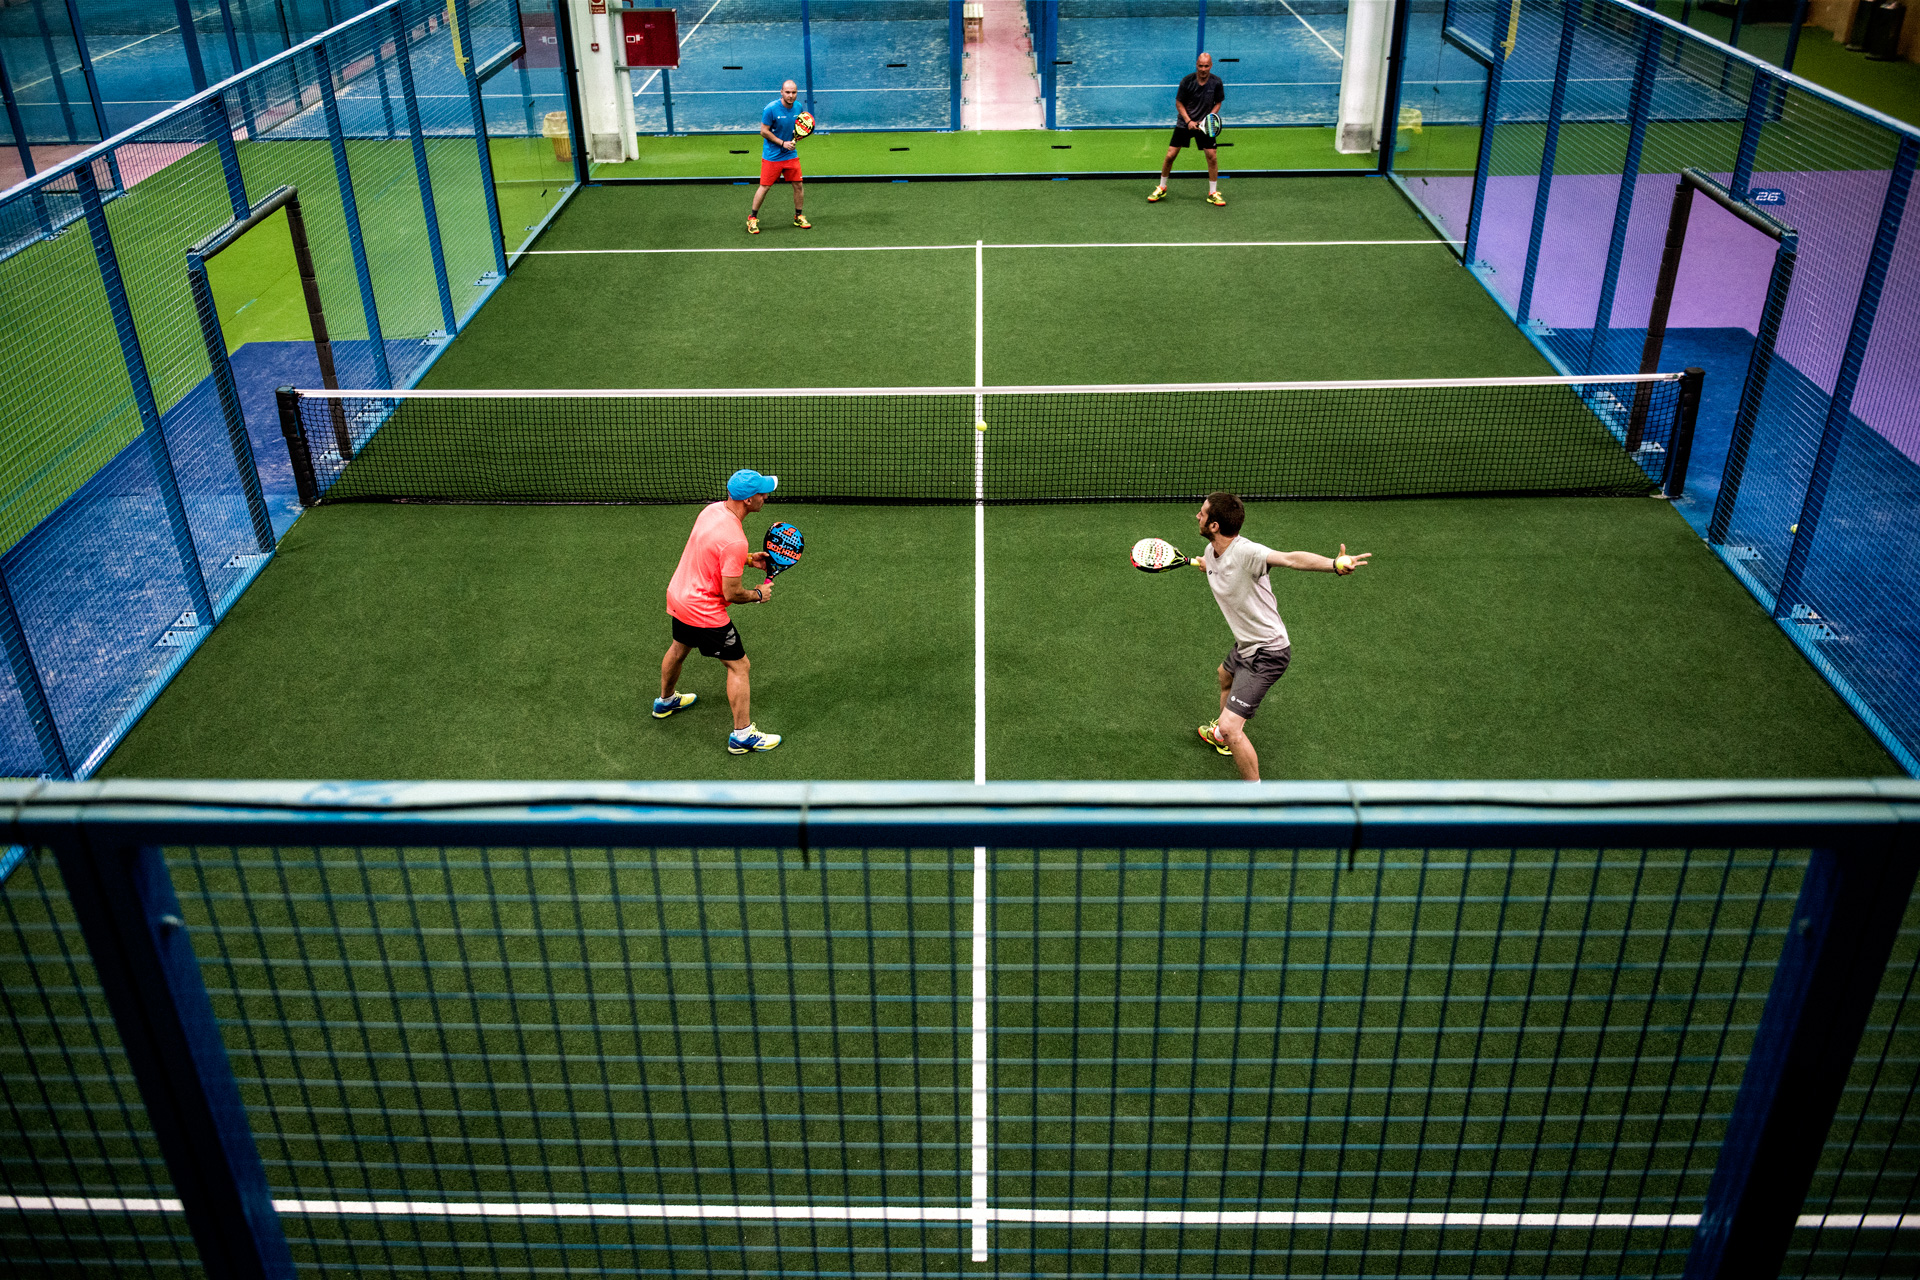 Why Should You Invest in a Tennis Court?